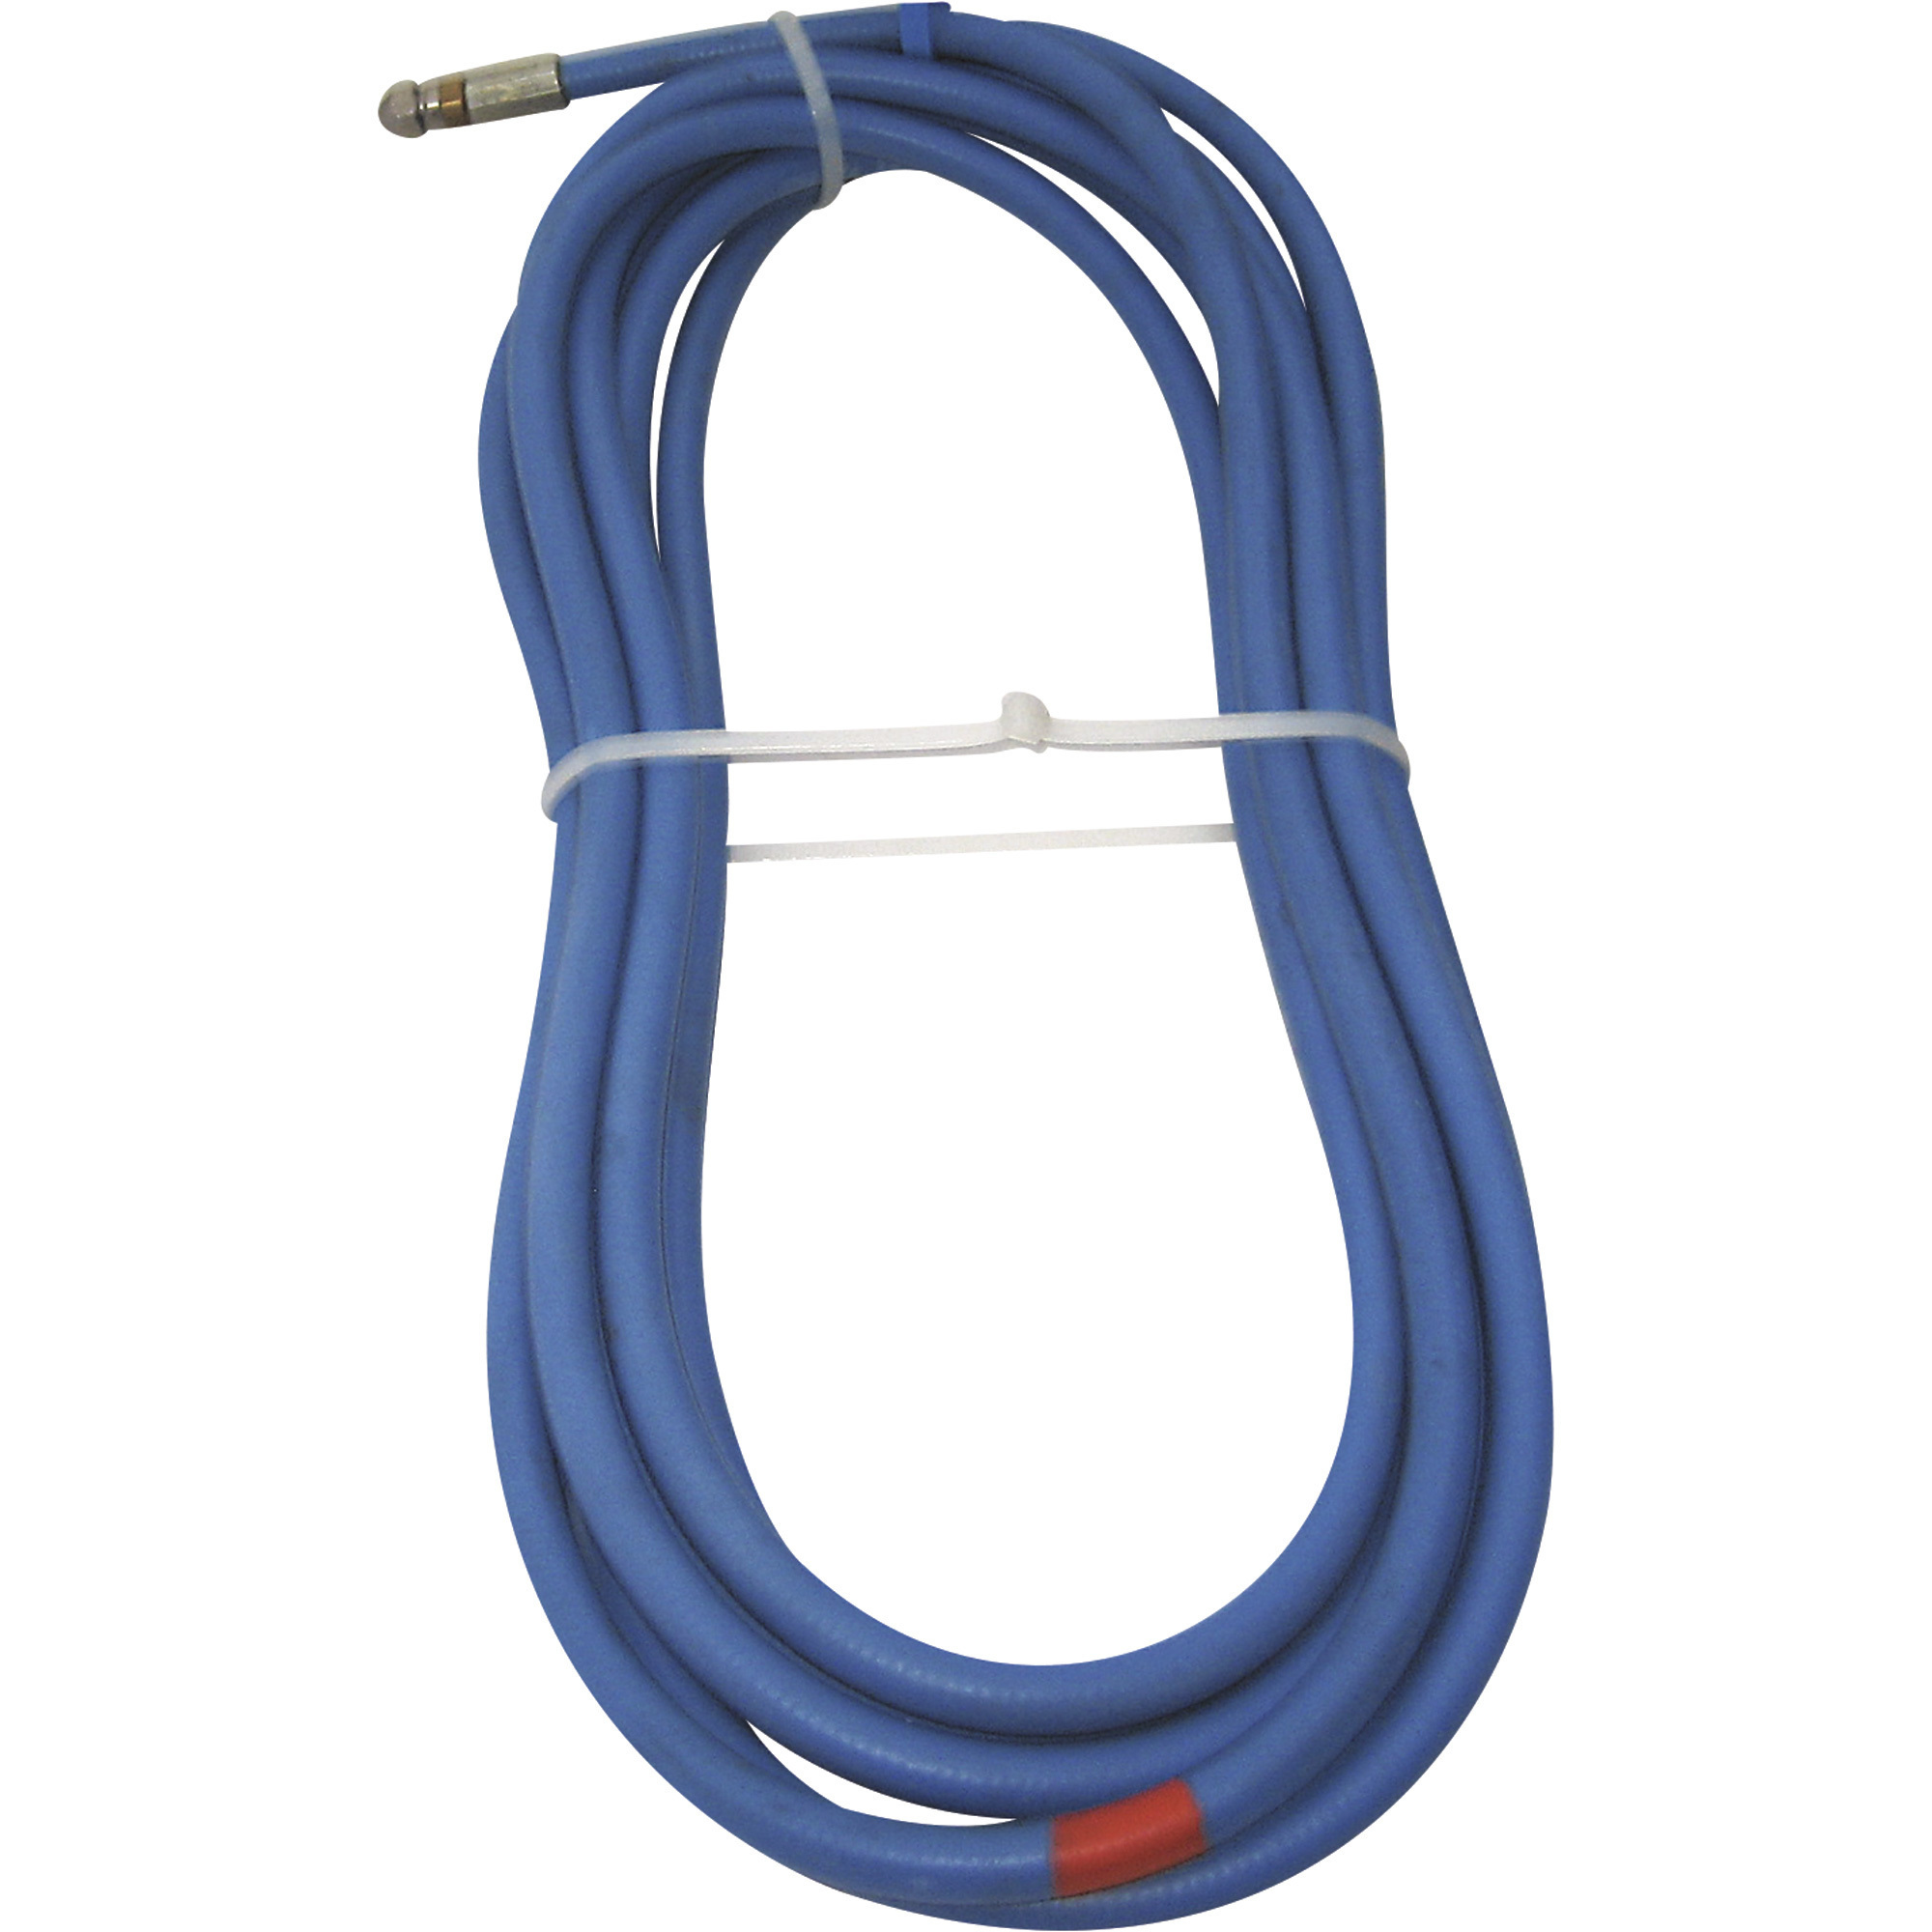 NorthStar Sewer and Drain Cleaning Hose, 3000 PSI, 30ft. x 3/8Inch, Model WSI 410581